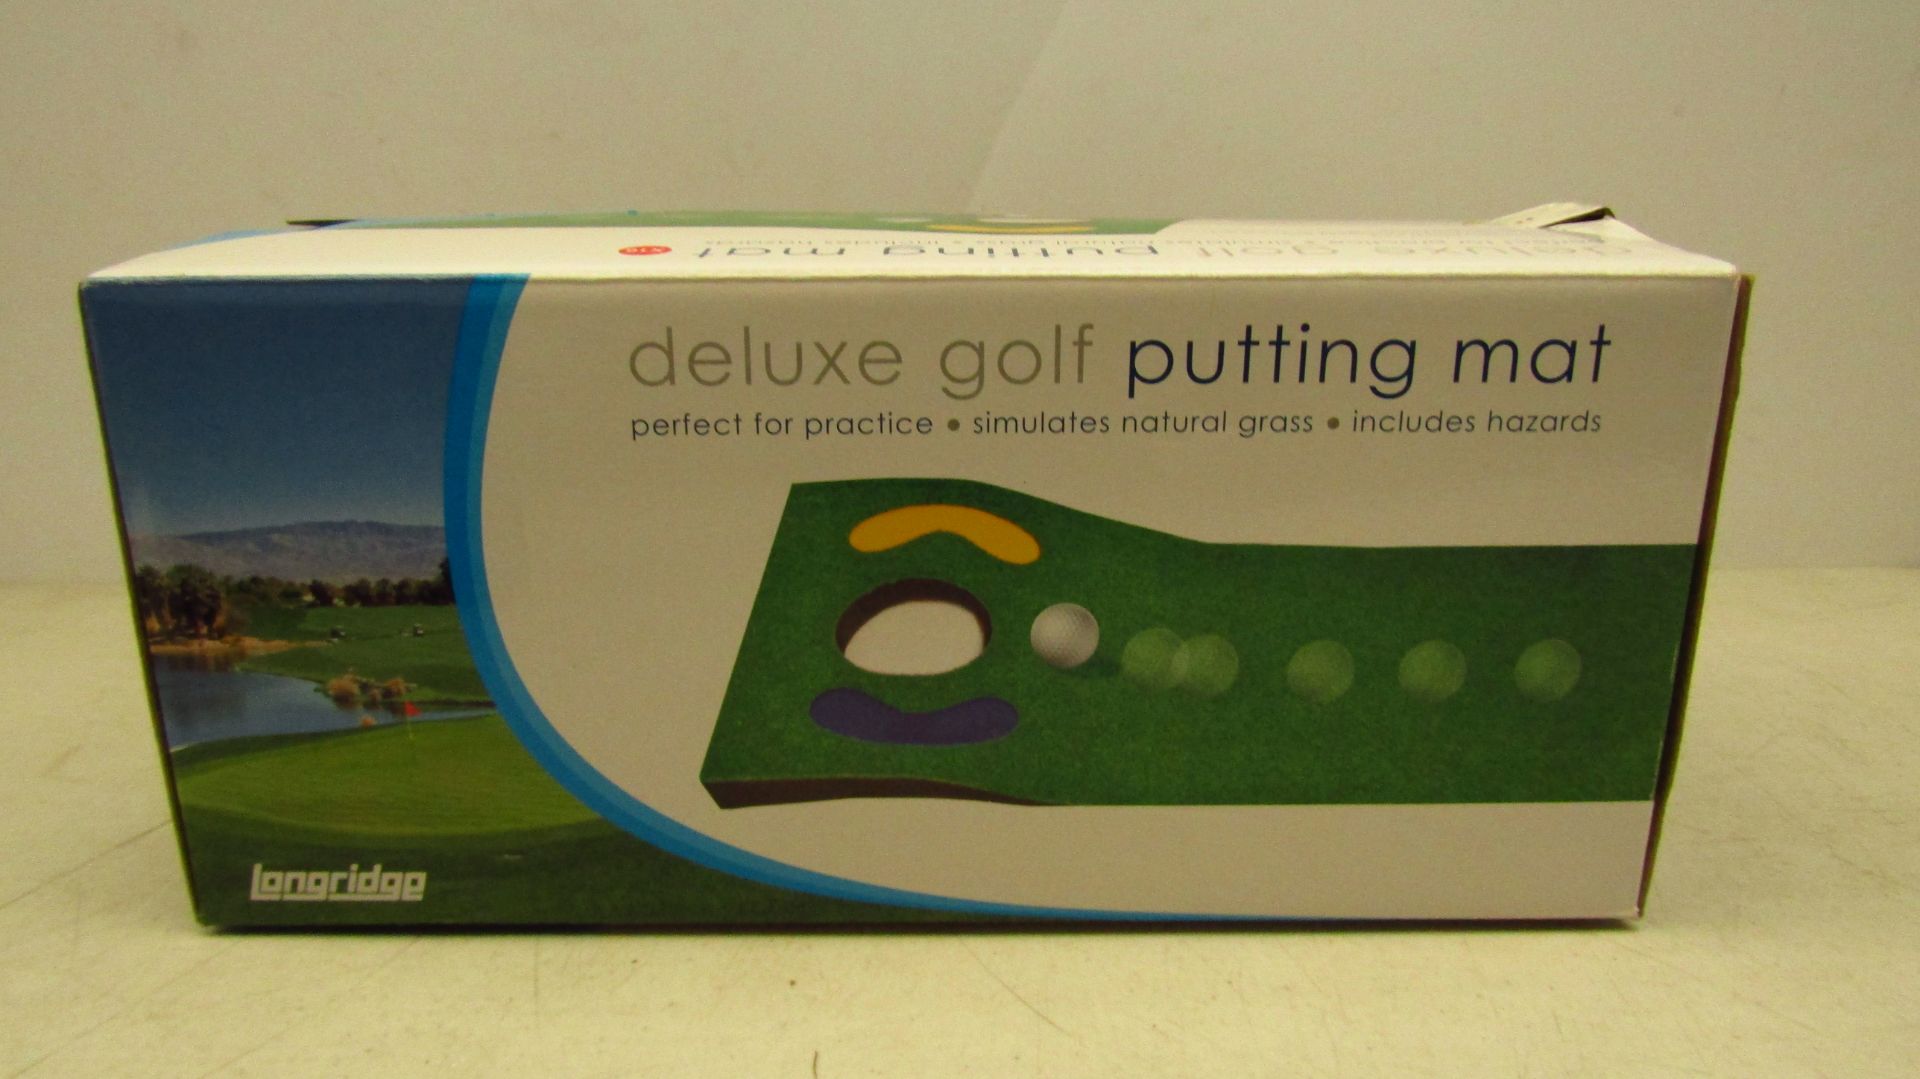 Deluxe gold putting mat, stimulates natural grass including hazards. Unchecked and boxed.